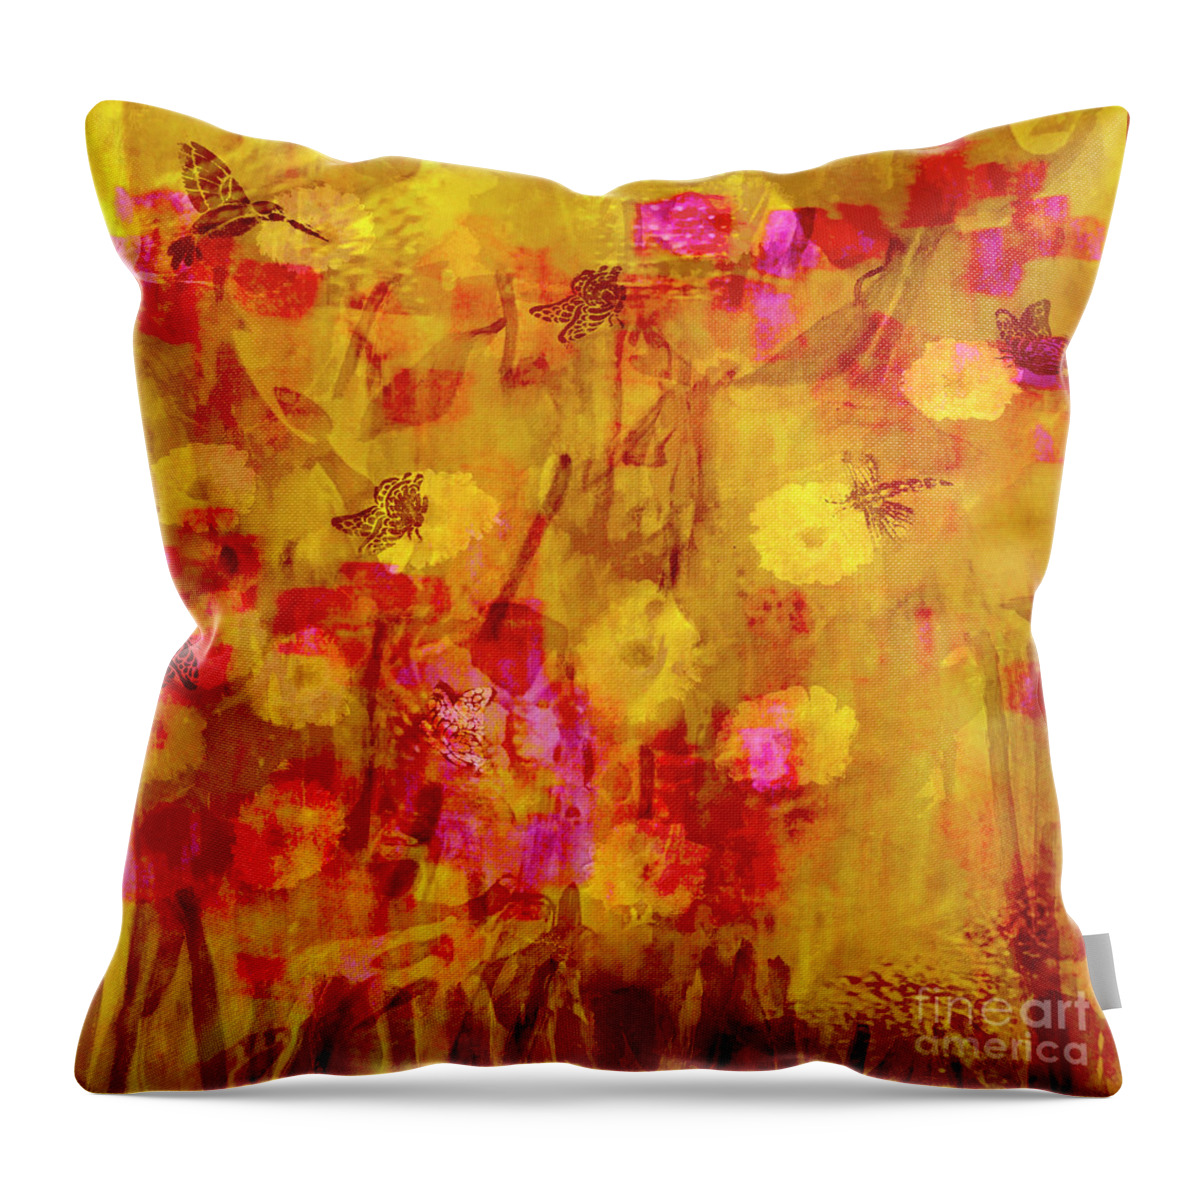 A-fine-art Throw Pillow featuring the painting In The Garden Of Shalom 10 by Catalina Walker